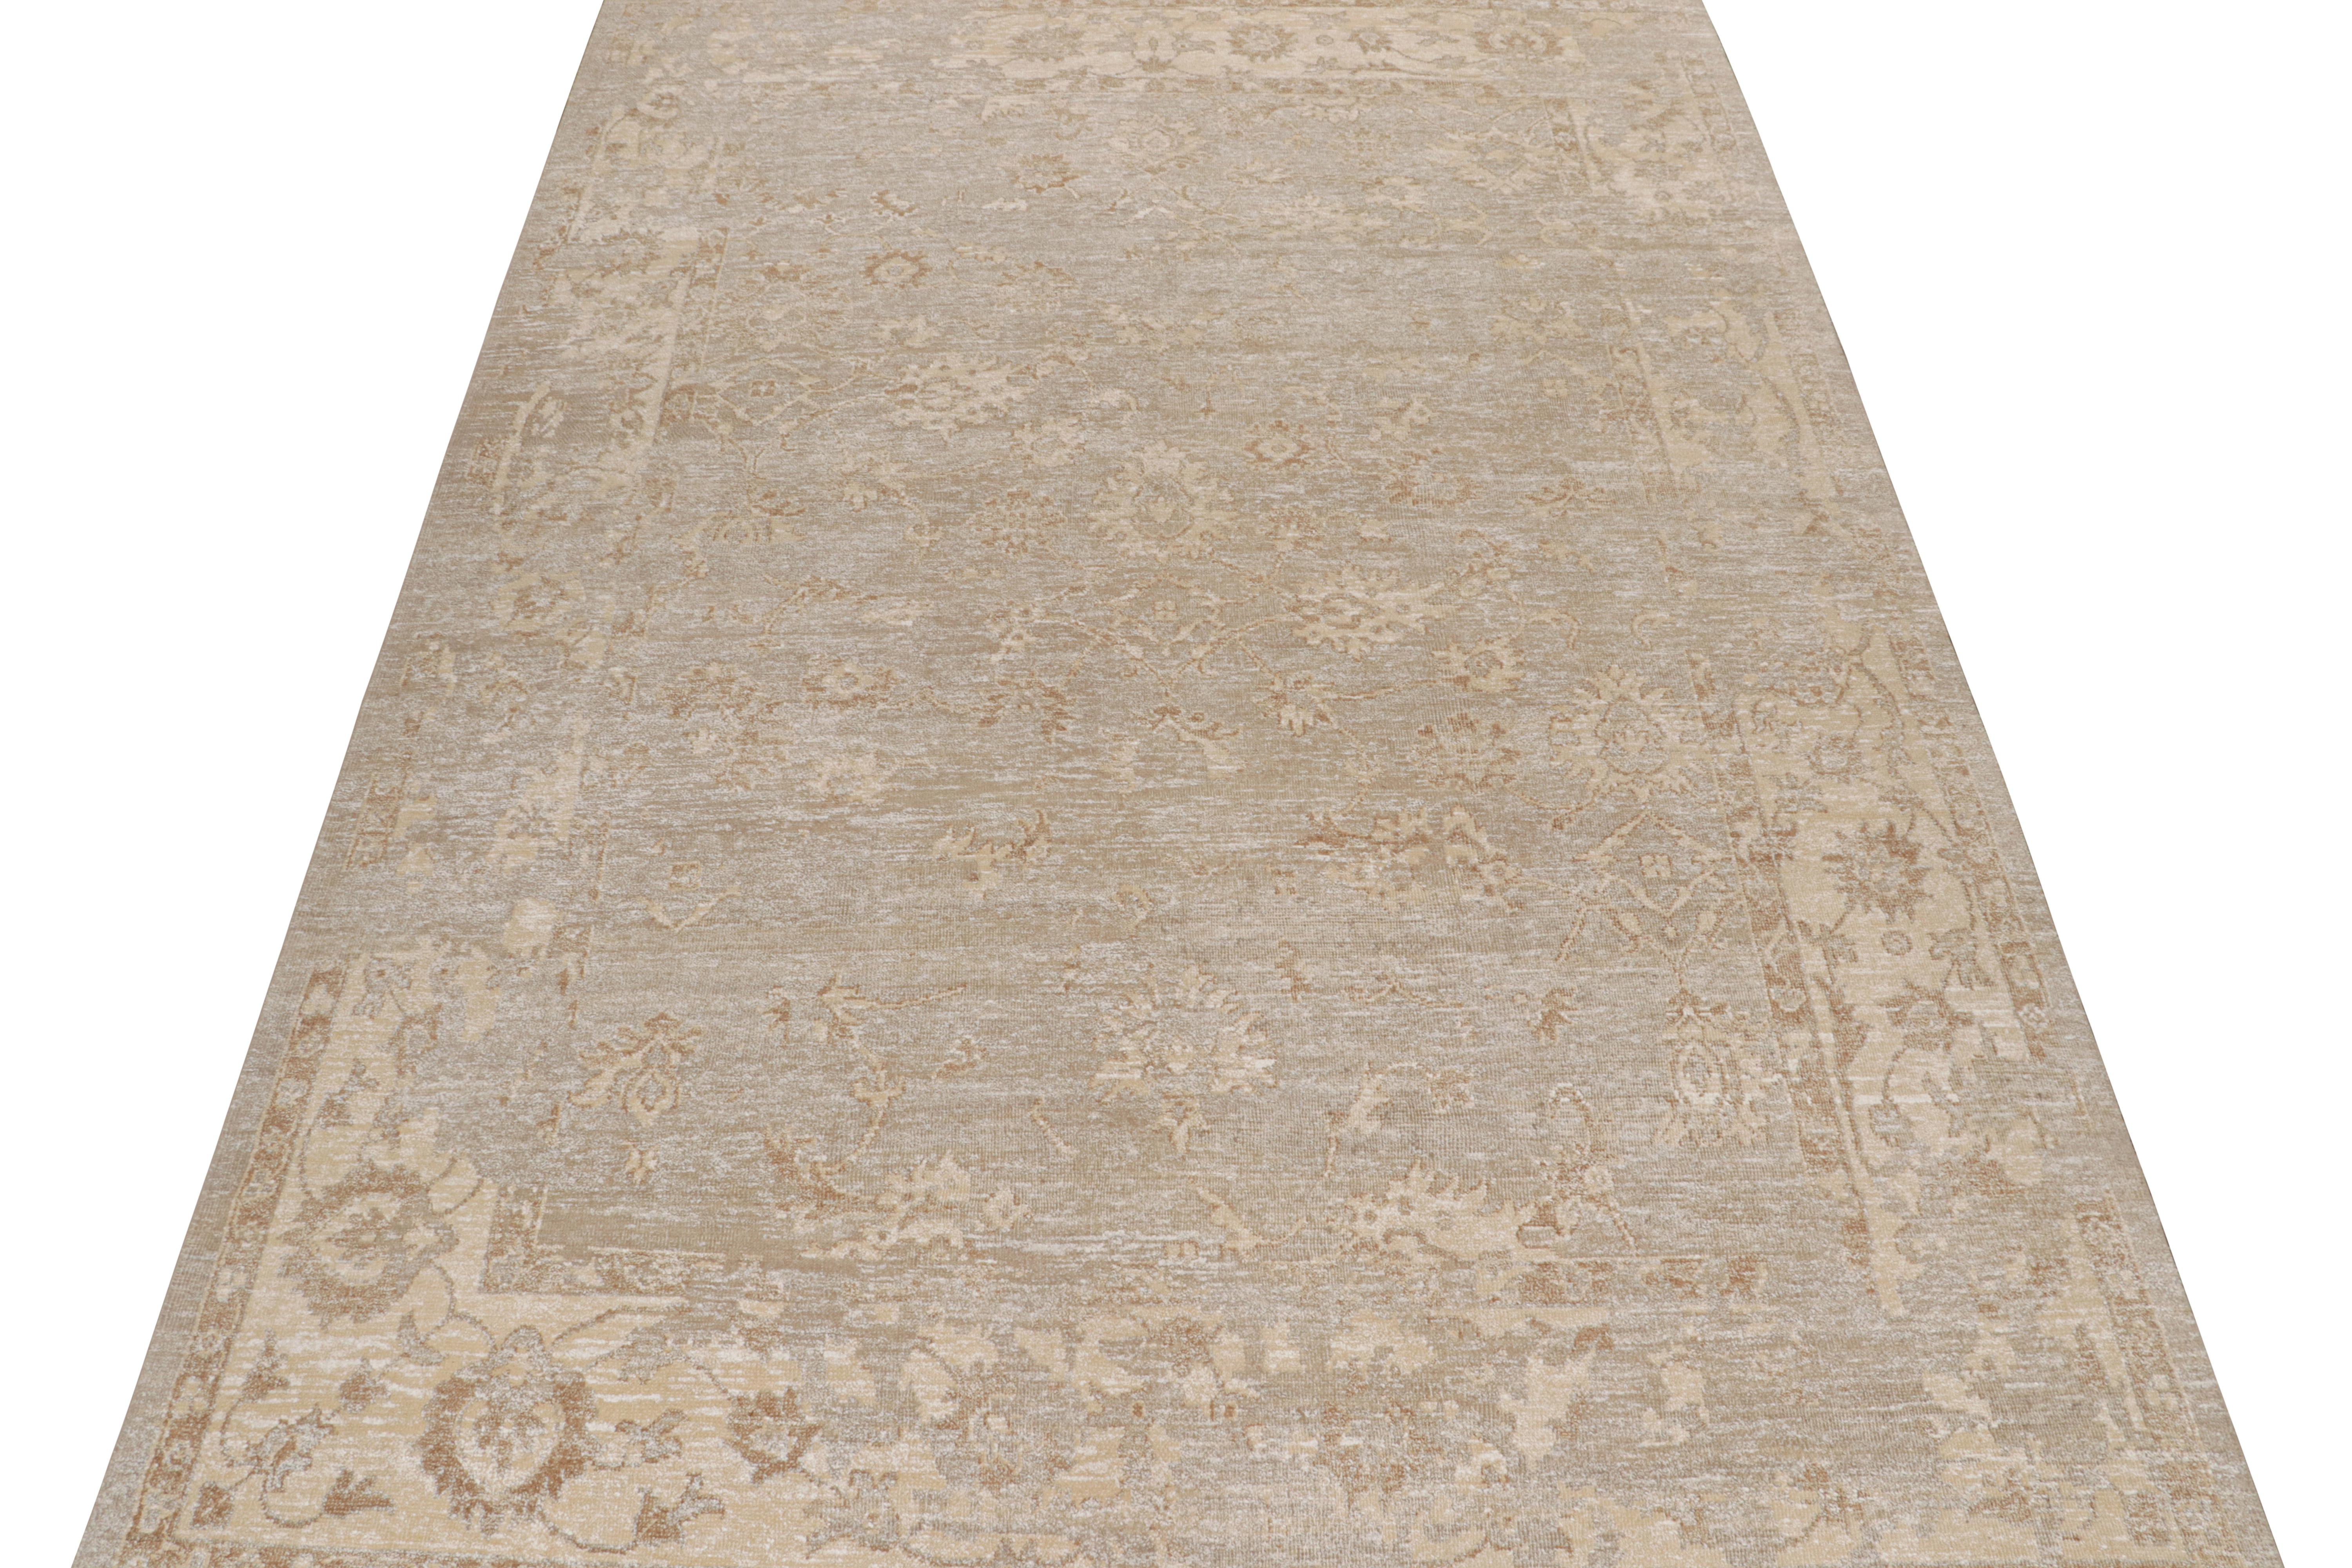 Indian Rug & Kilim’s Oushak Style Rug in Beige-Brown & White Geometric Patterns For Sale